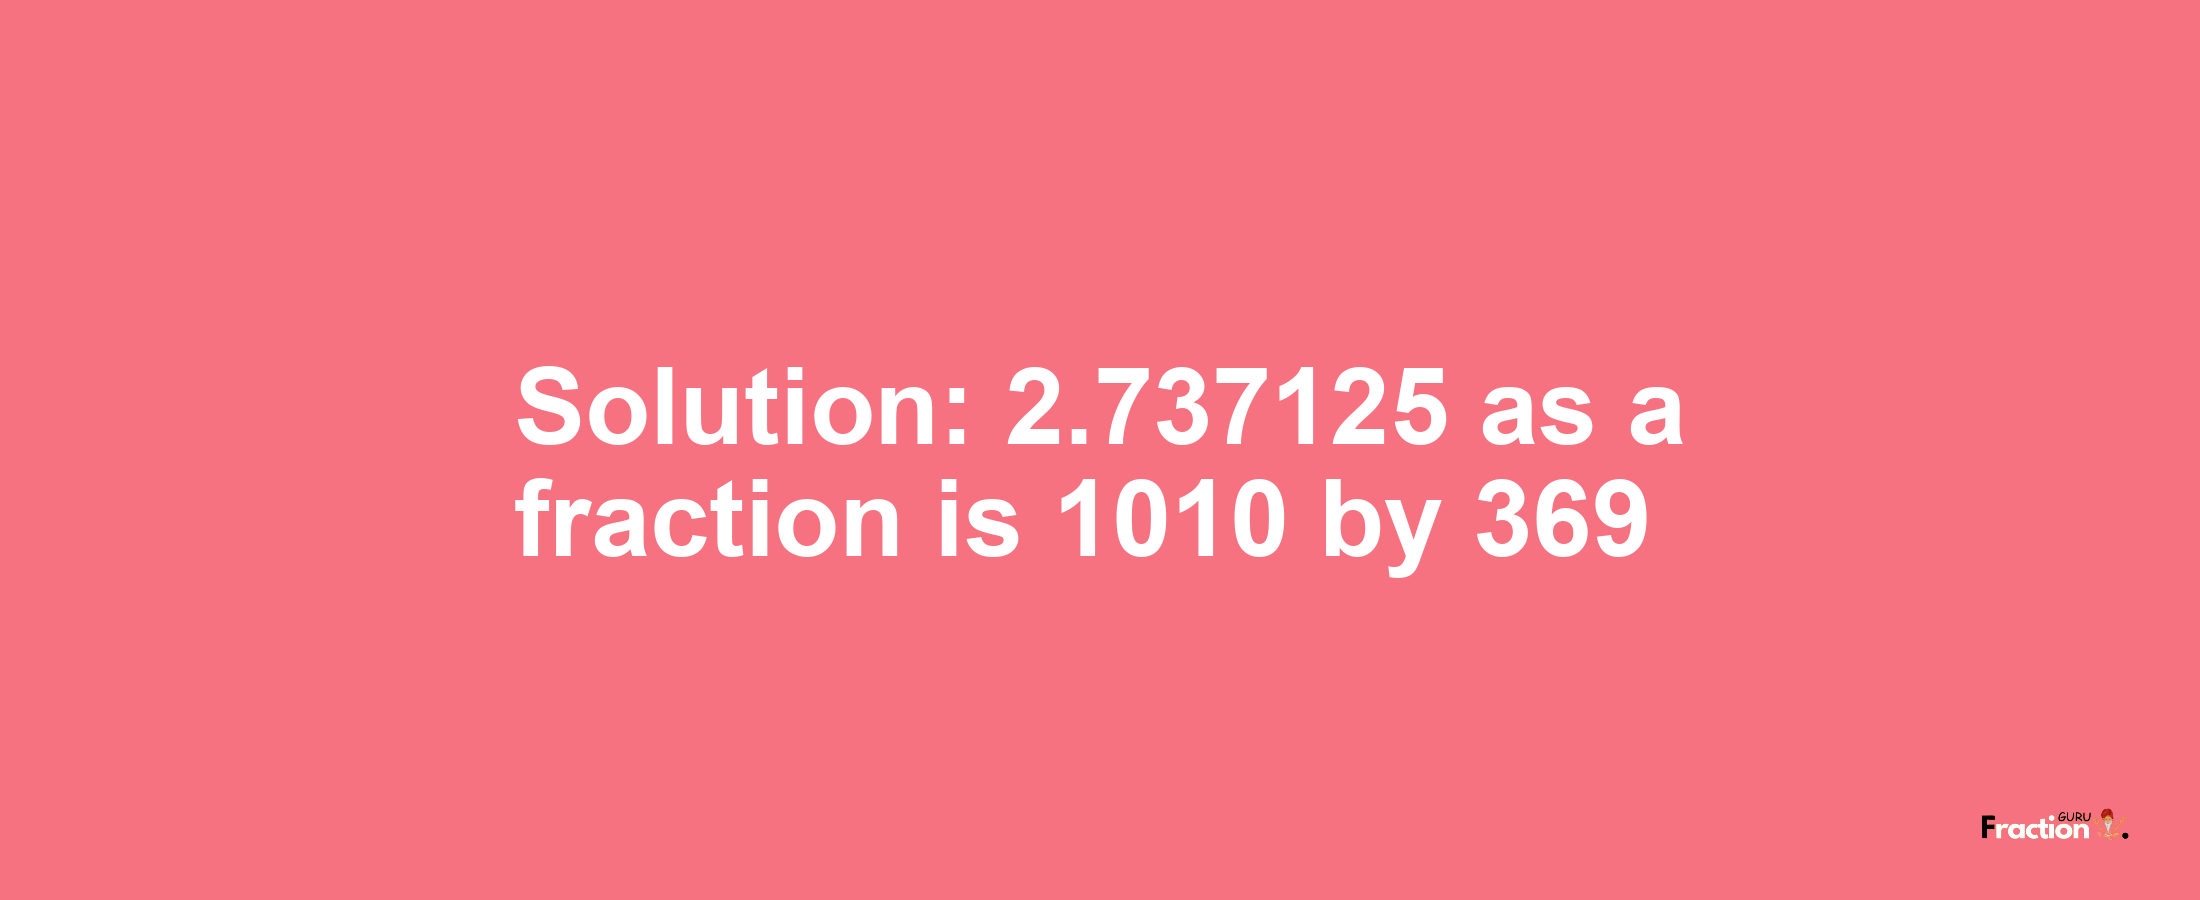 Solution:2.737125 as a fraction is 1010/369